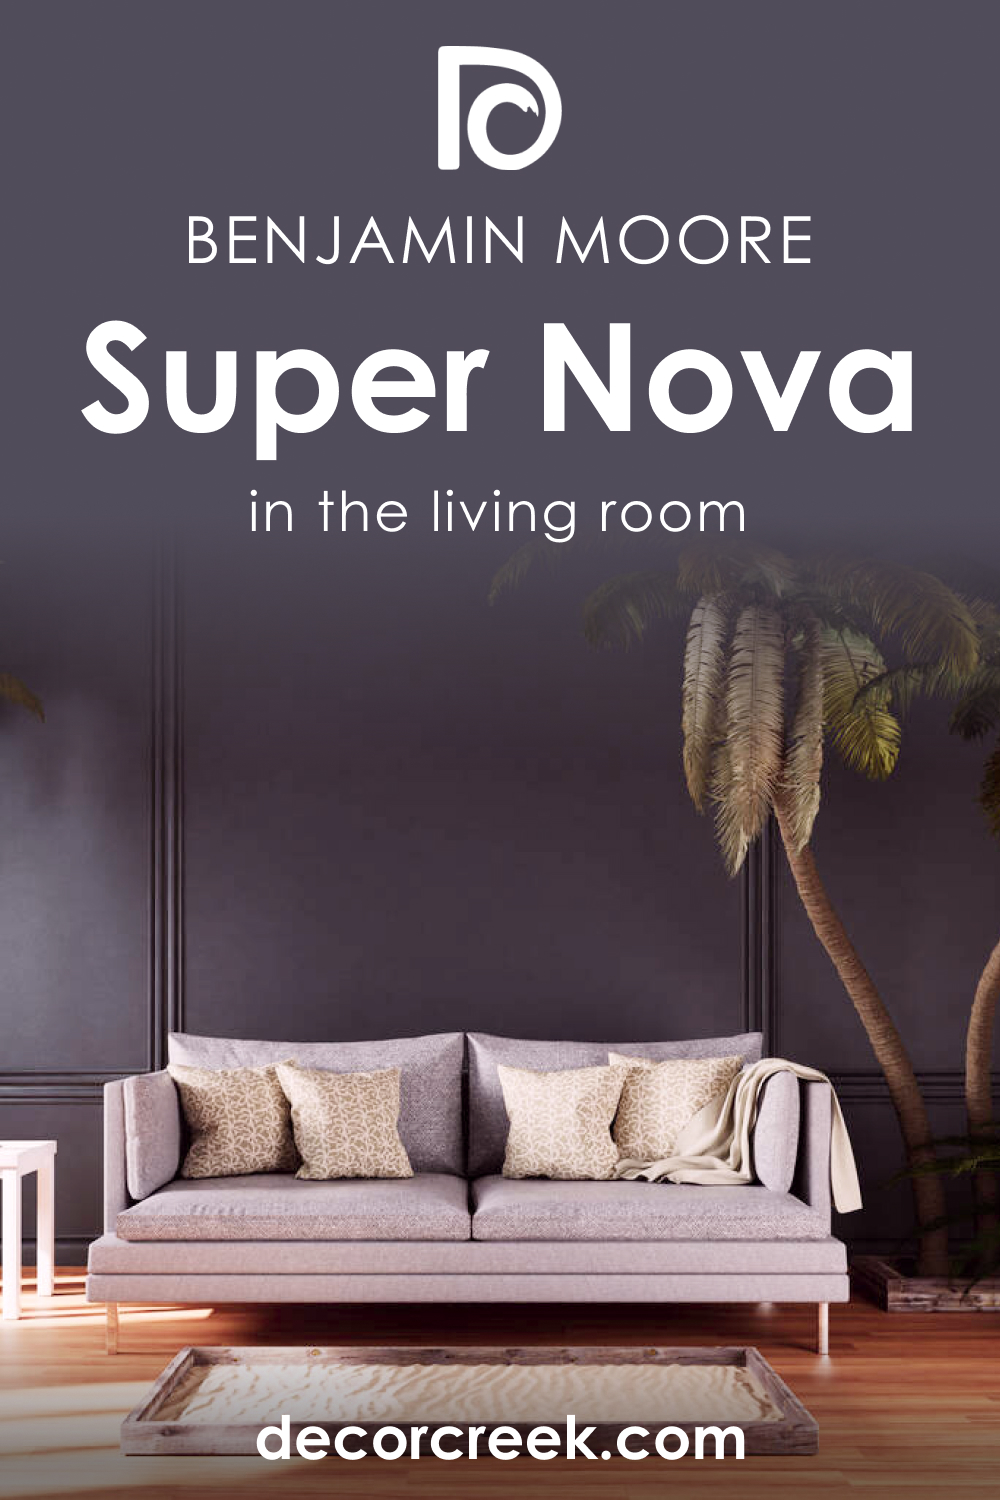 How to Use Super Nova 1414 in the Living Room?